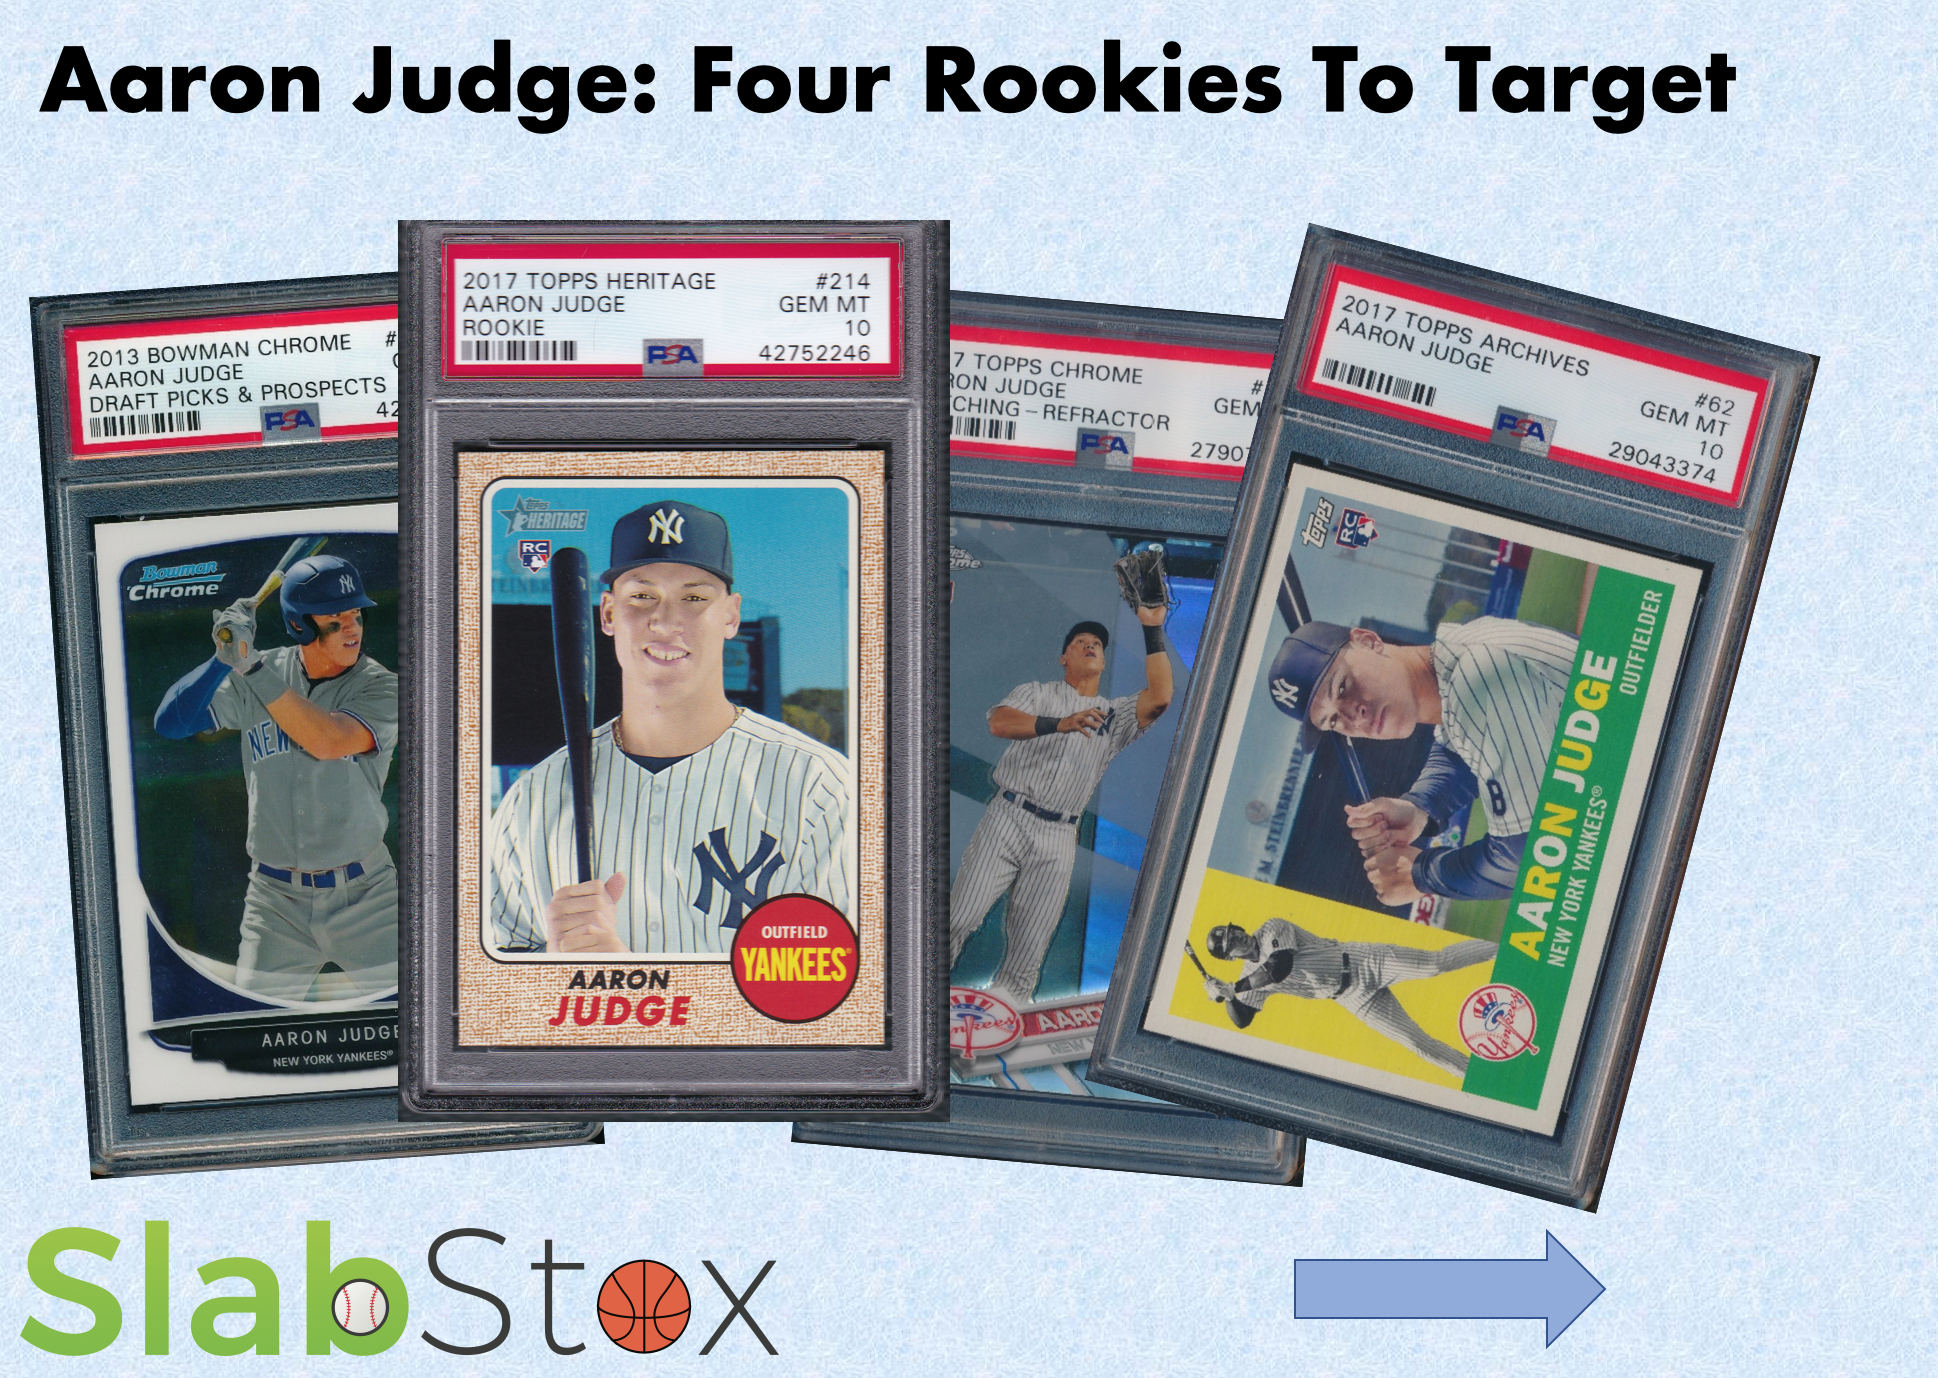 Graphic of four different Aaron Judge cards by SlabStox with text that says "Aaron Judge: Four Rookies To Target"